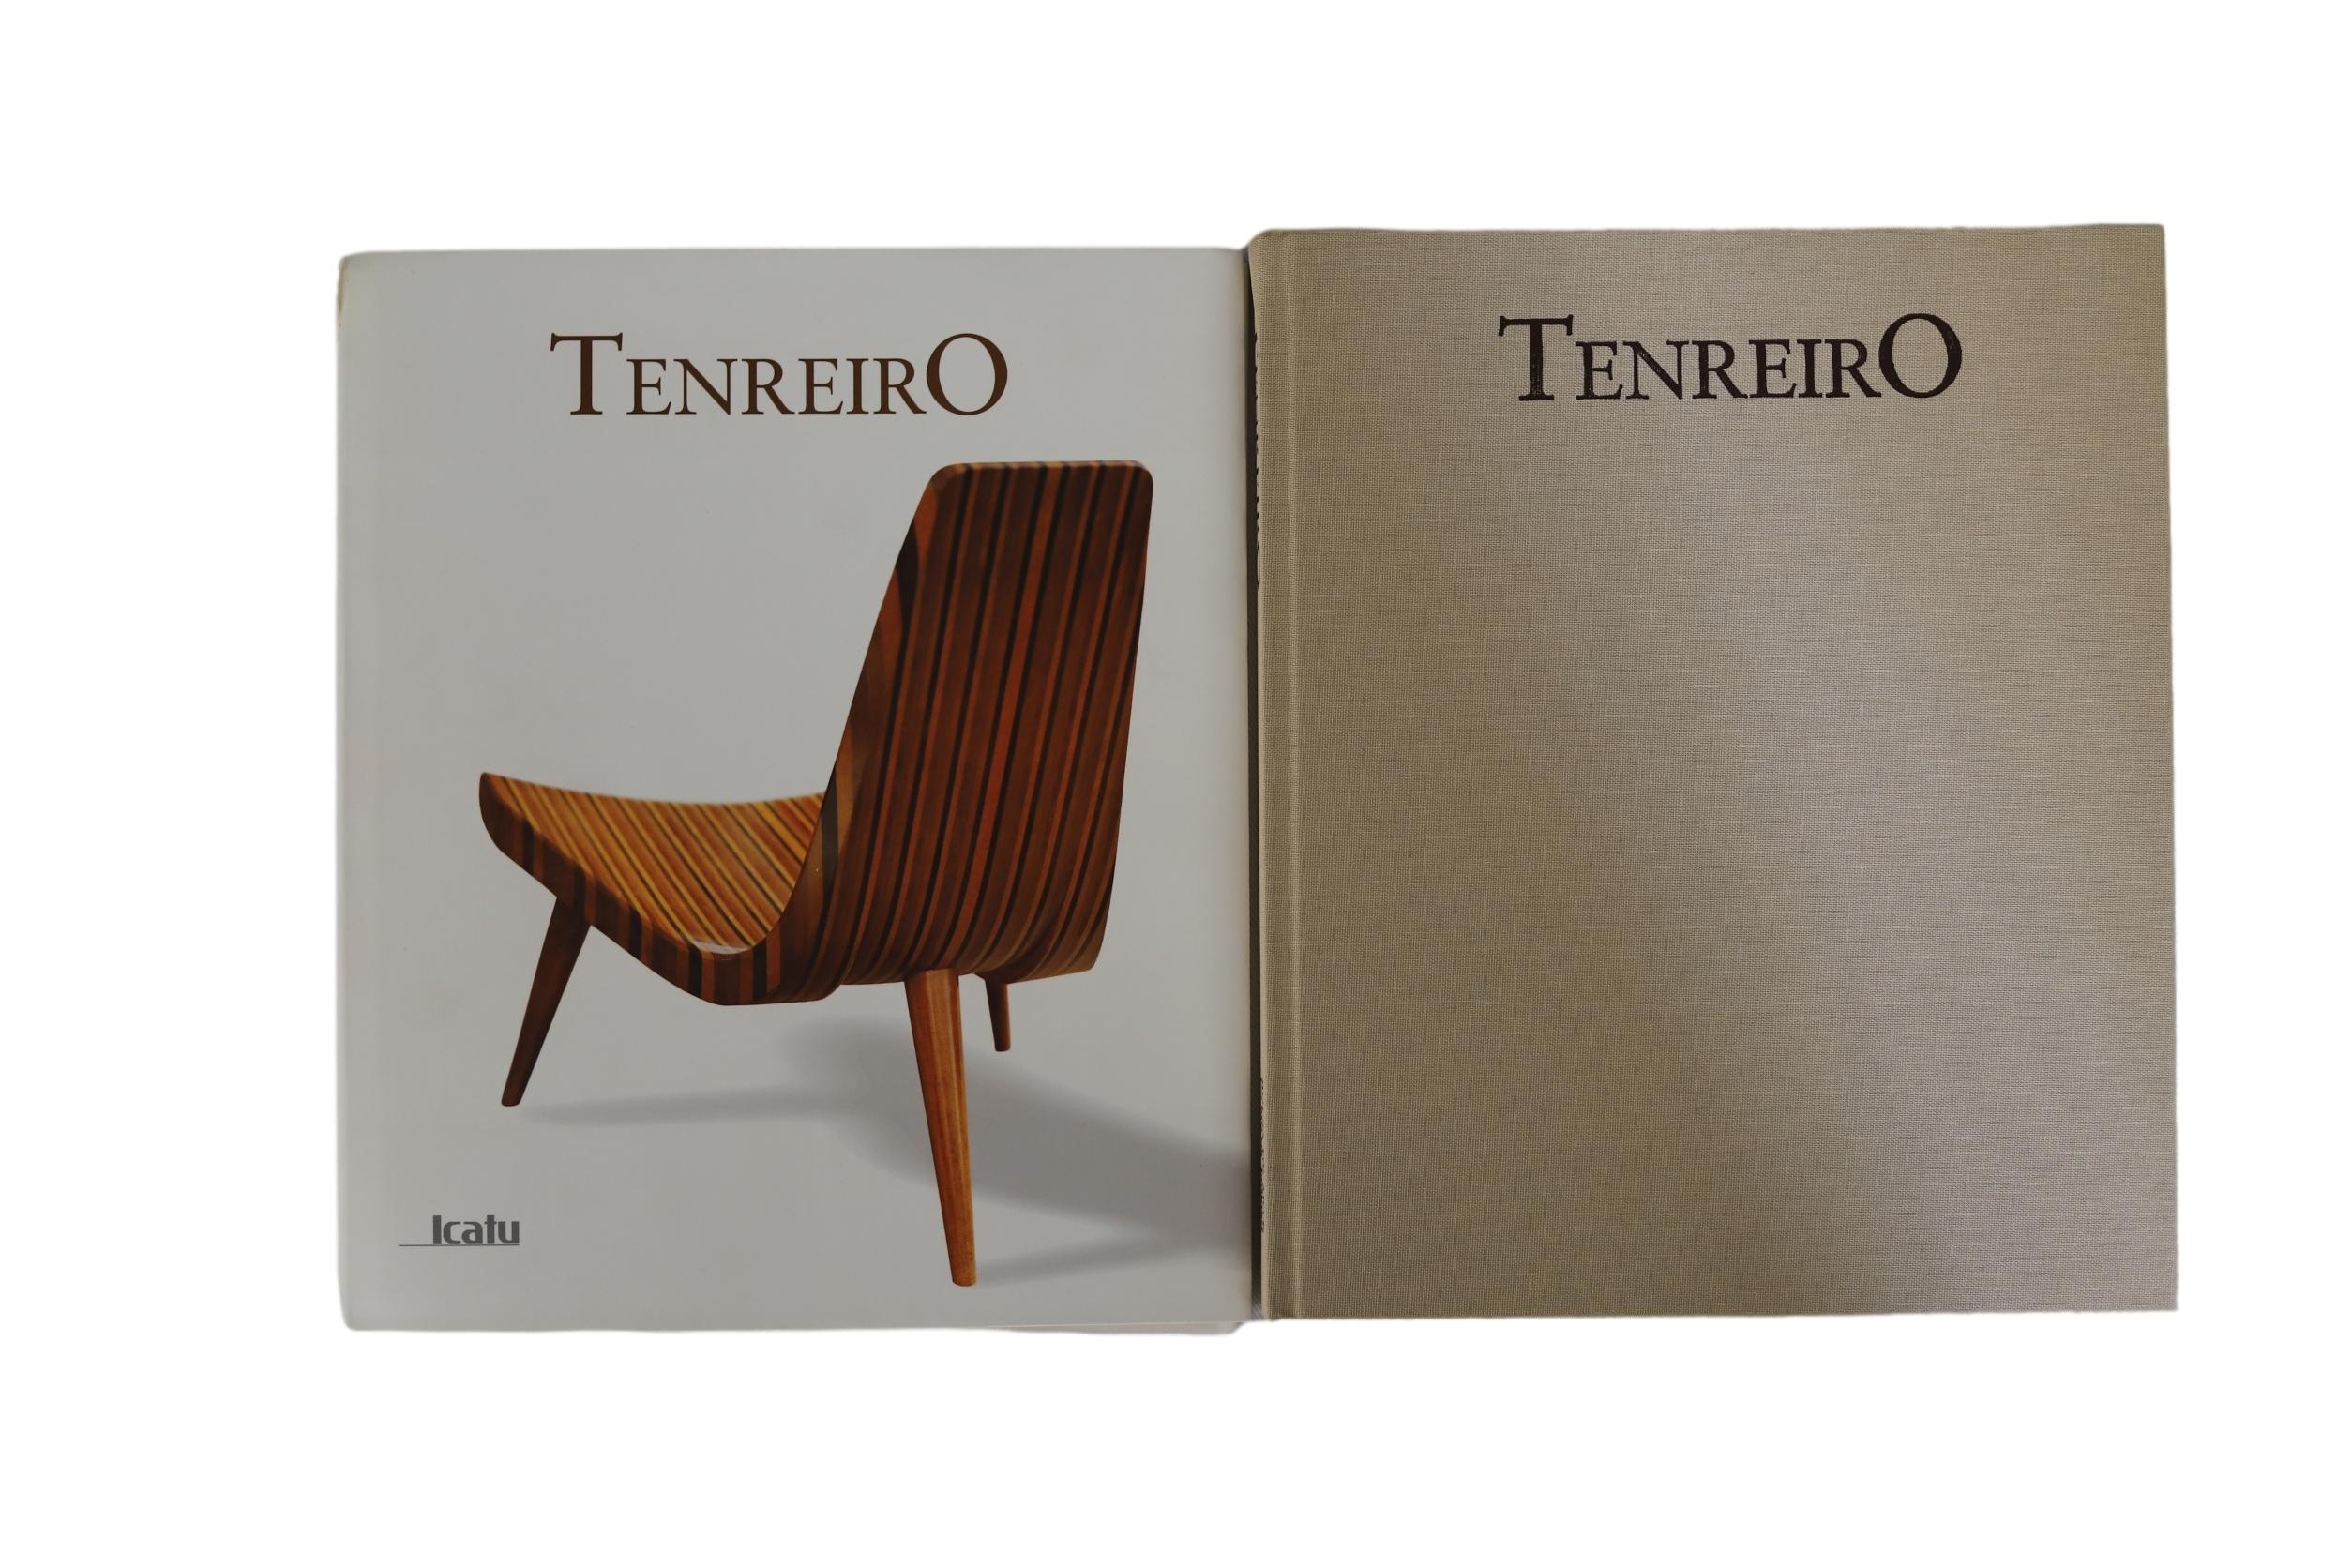 A limited English version of the monograph on Joaquim Tenreiro's works, one of the most representative designers of Brazilian furniture, published by Icatu and Bolsa de Arte do Rio de Janeiro. Year of publication 1998.

Fully illustrated in